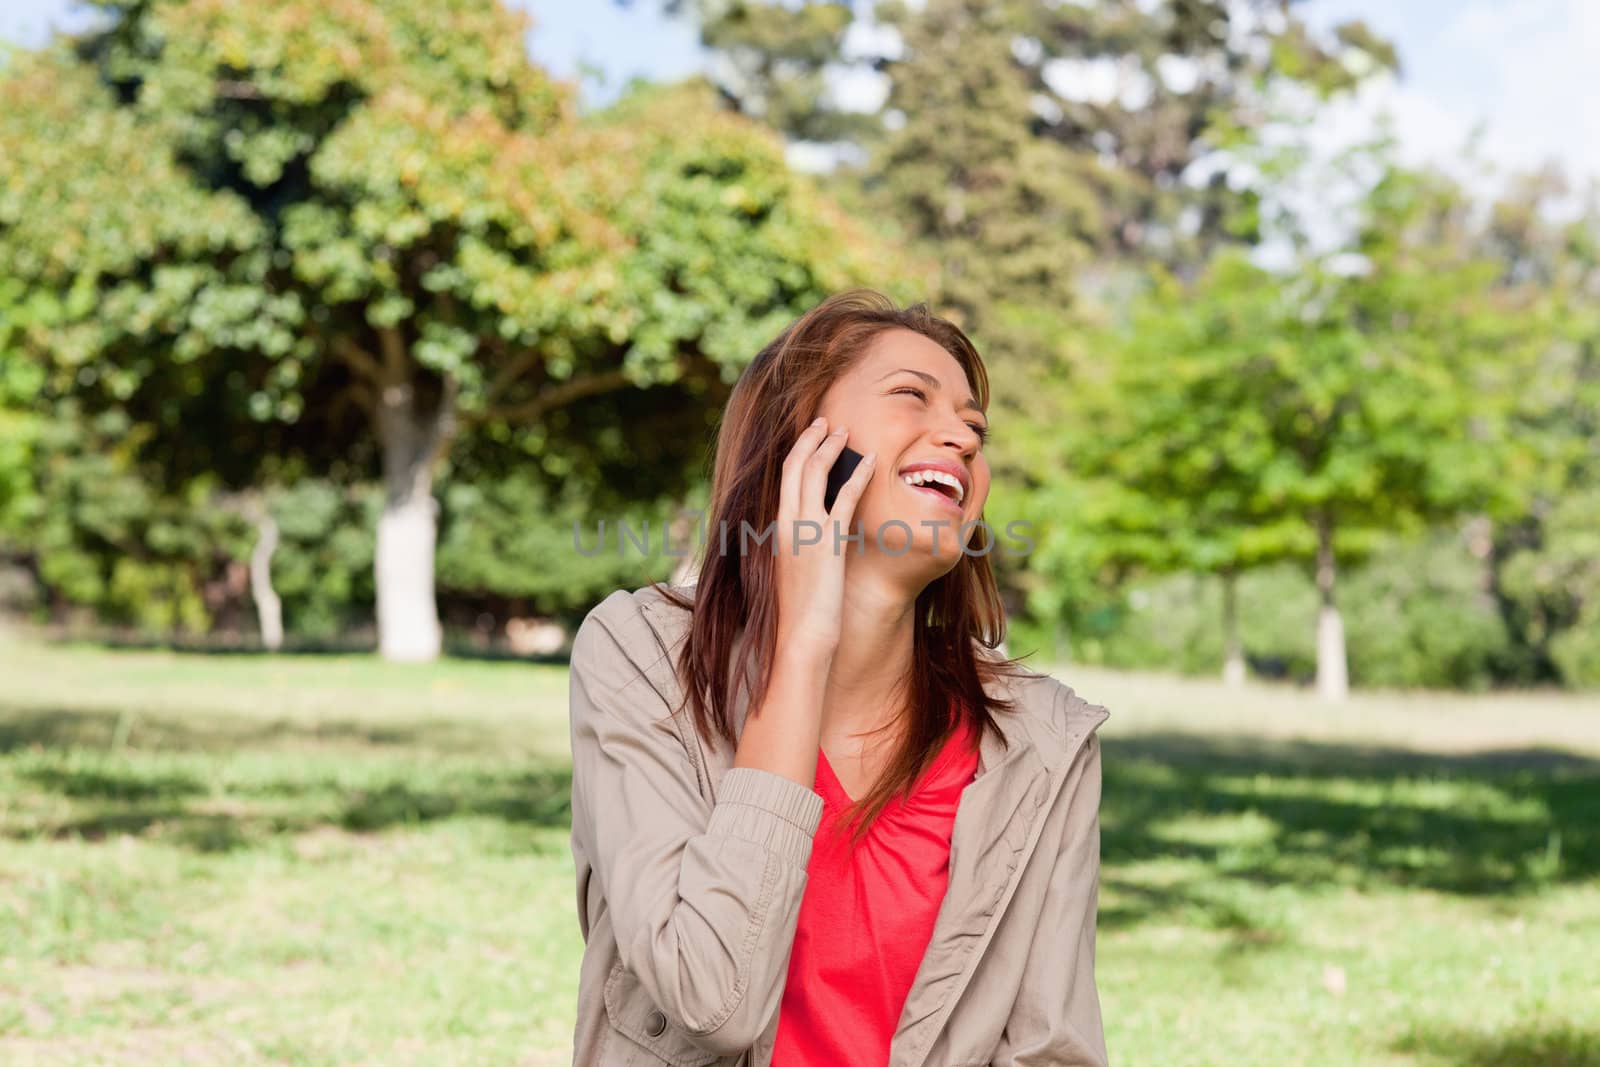 Woman laughing happily on a phone while standing in a bright grassland environment